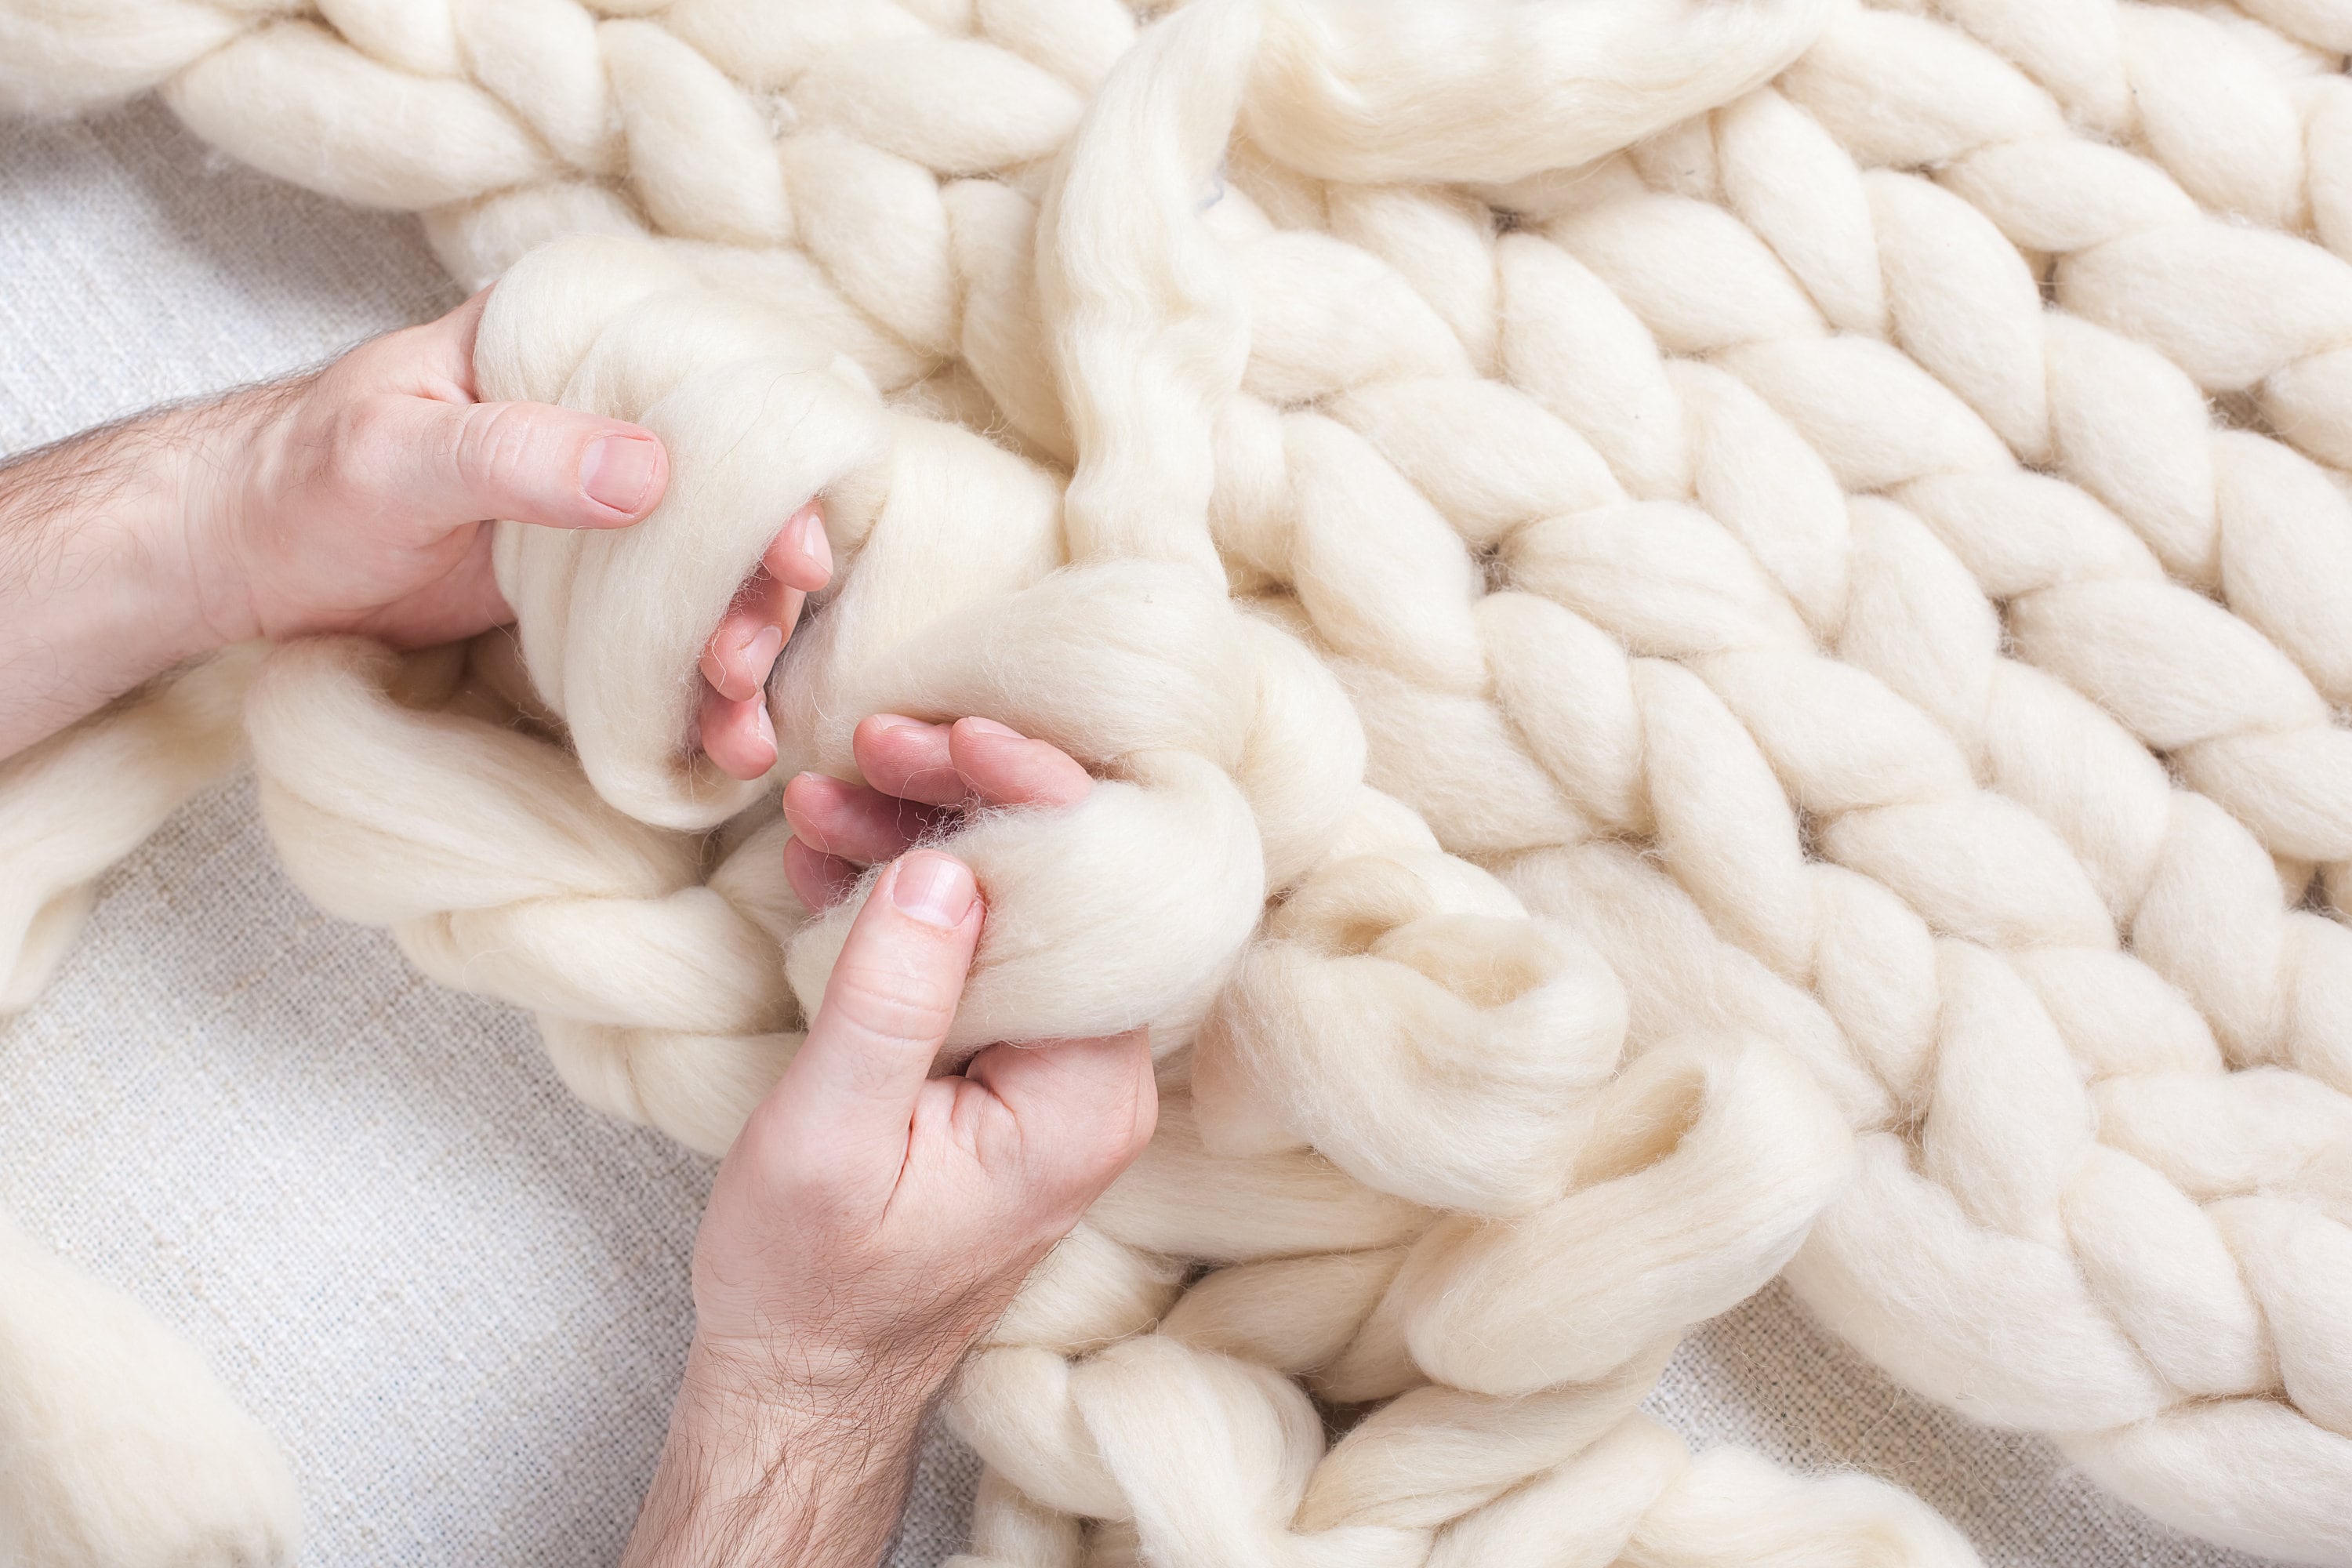 Wool Roving Top 8 Lbs Pounds White DIY Roving Fiber Spinning, Make Your Own  Felting Crafts Large Chunky arm or PVC Knit Throw Blanket USA 